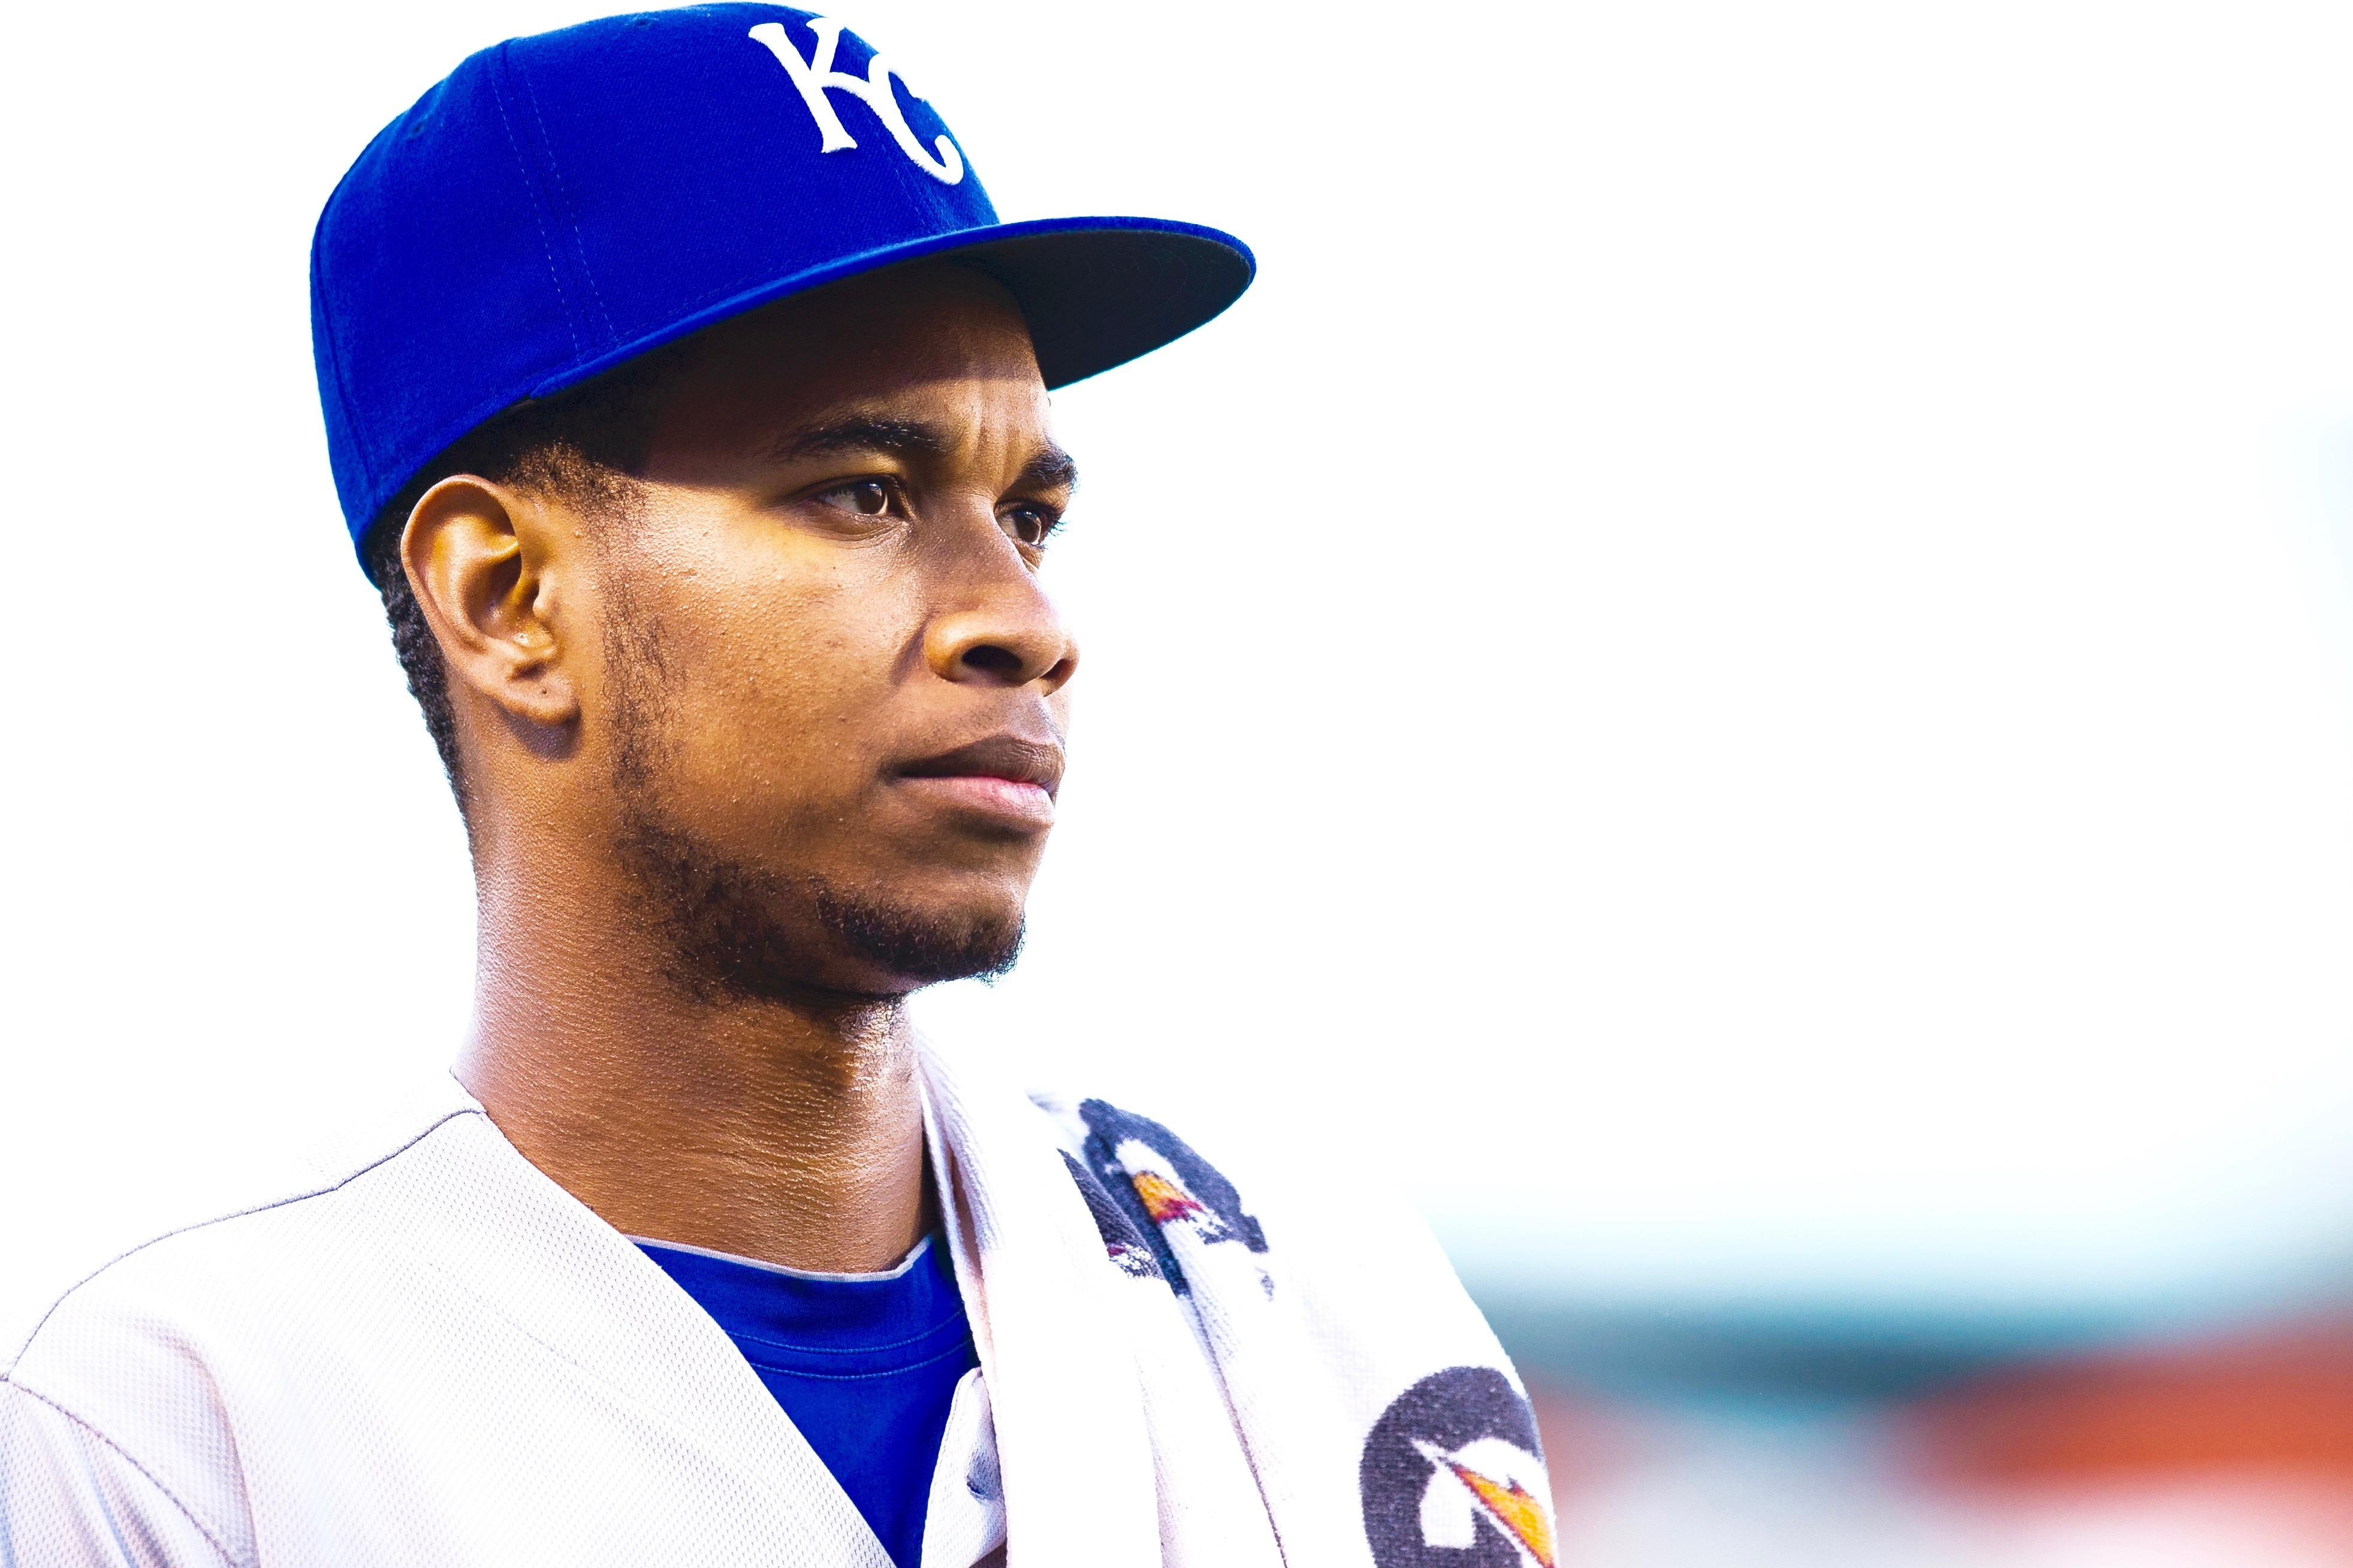 Yordano Ventura Is Not a Large Person - Royals Review